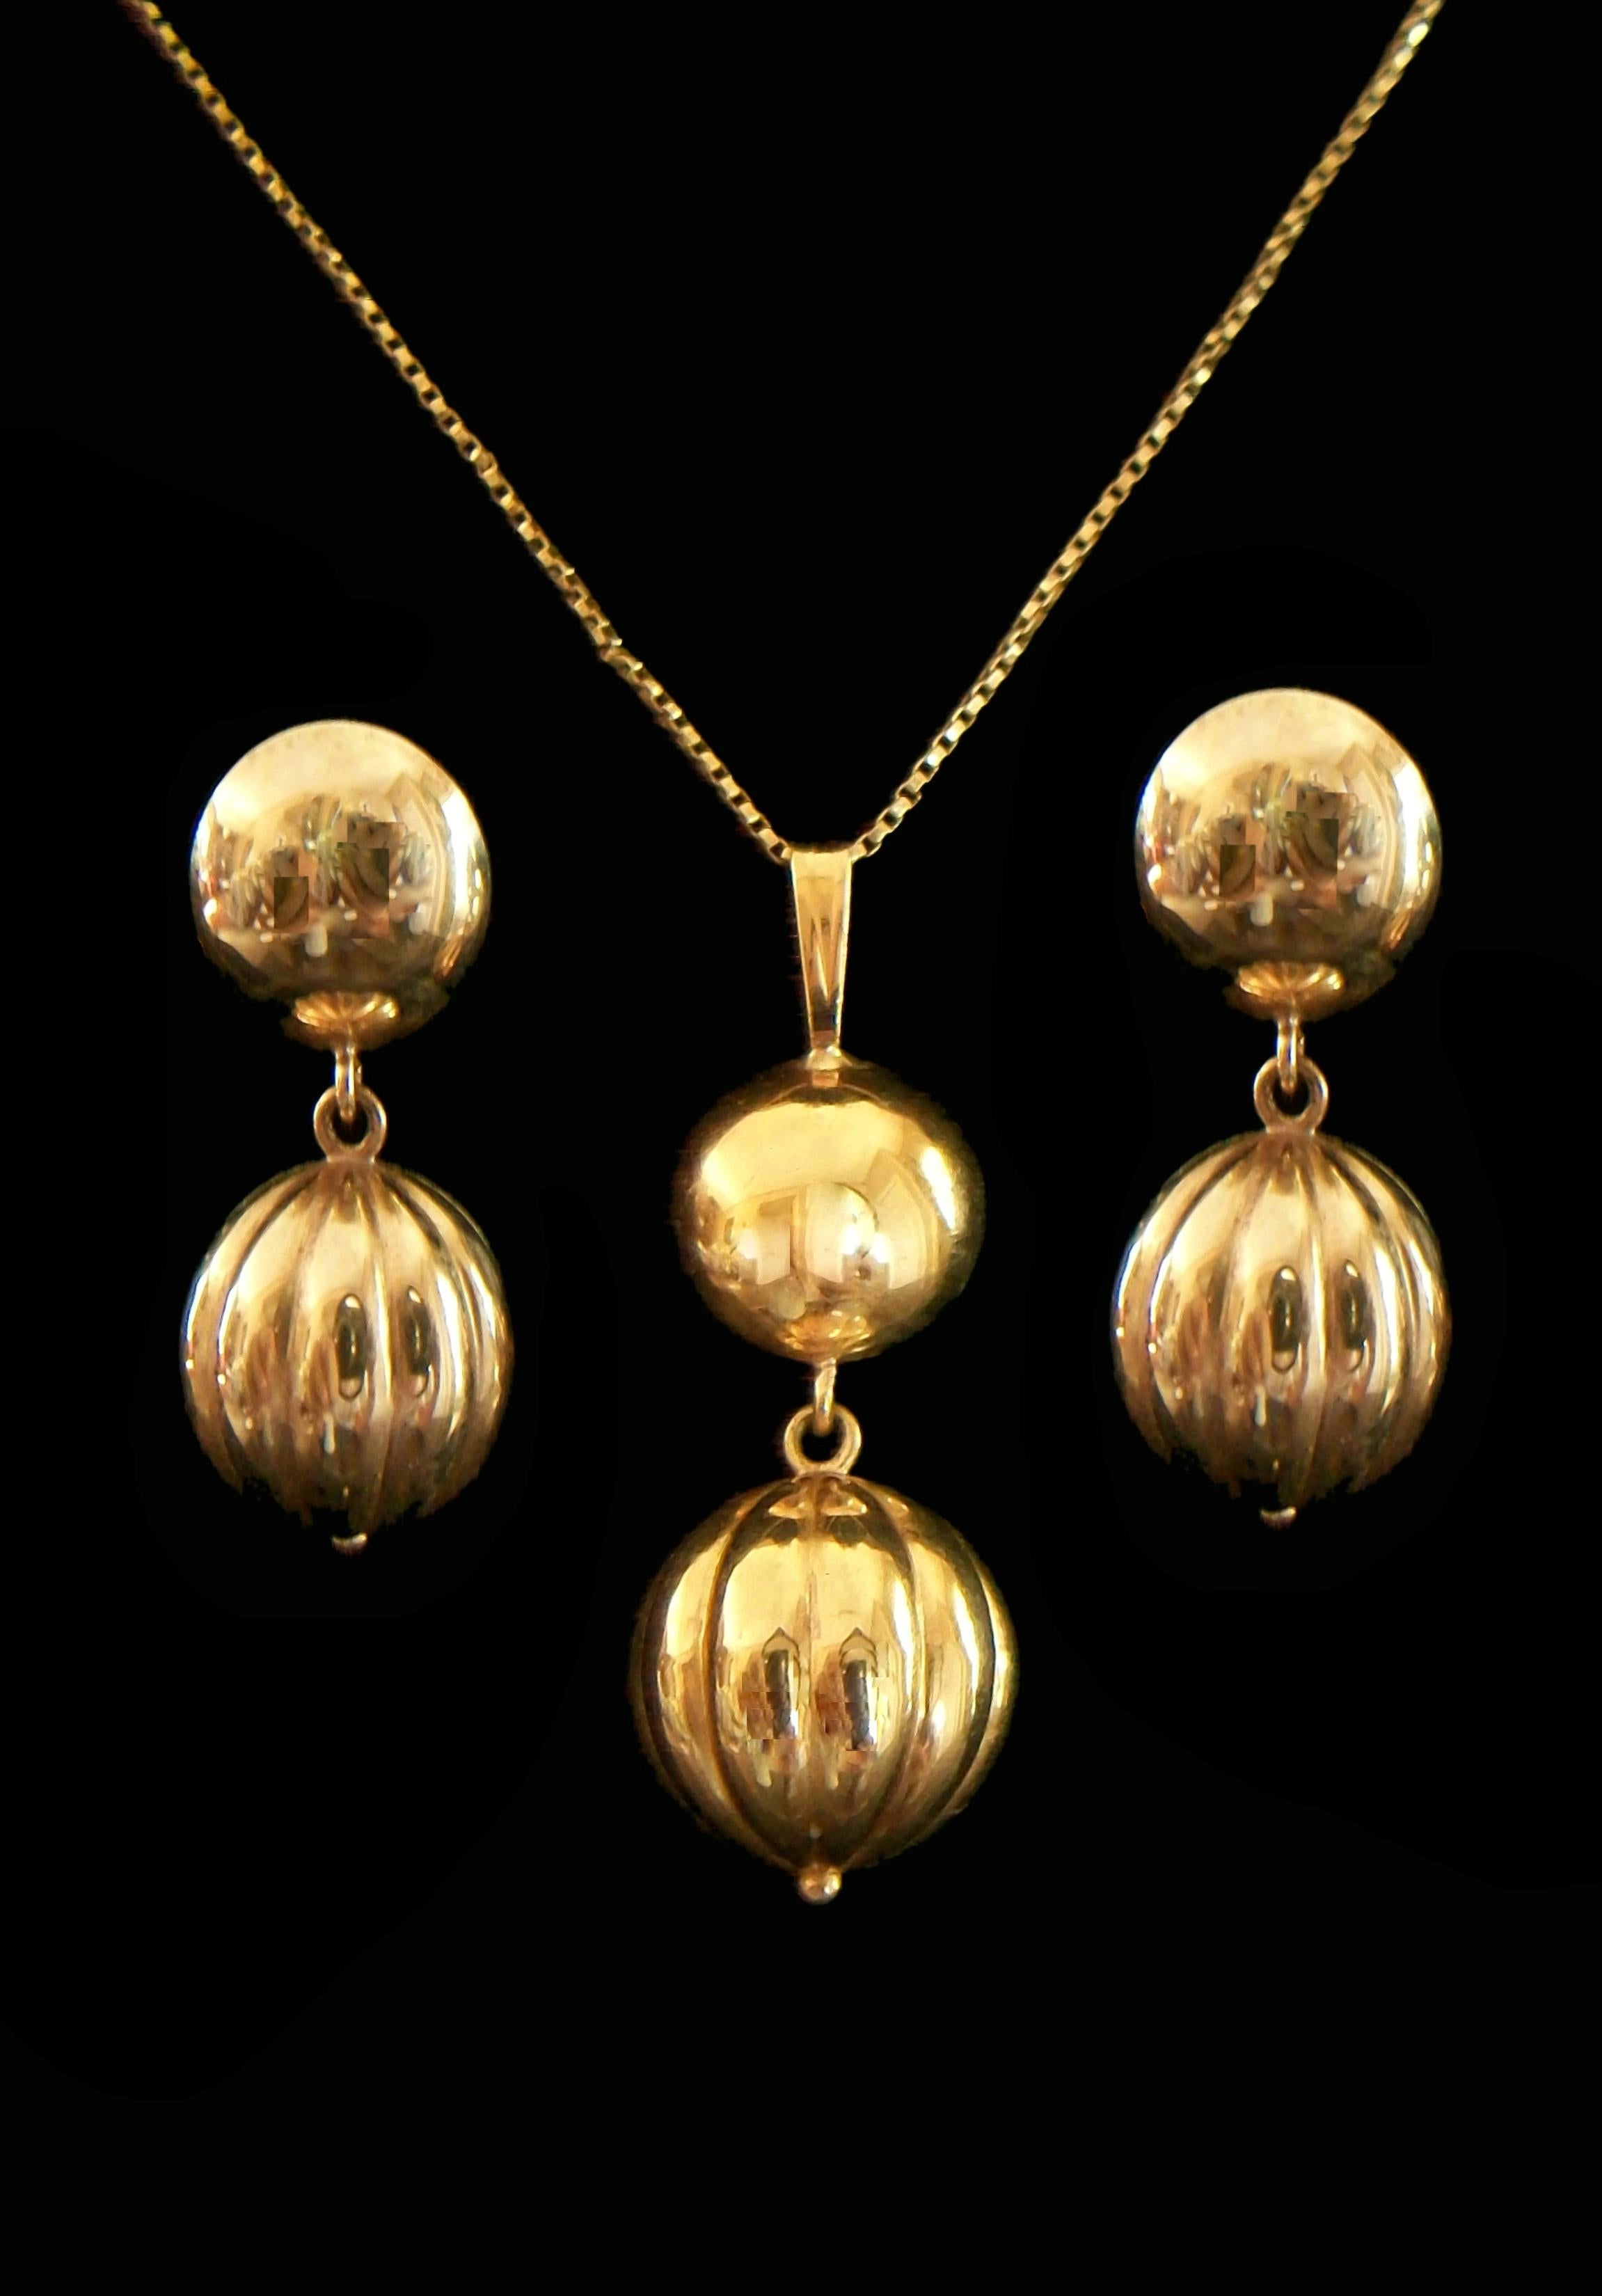 Mid Century Modern pendant necklace and earrings set - all pieces hand made from 10K yellow gold - pendant suspended by a large bale on an 18